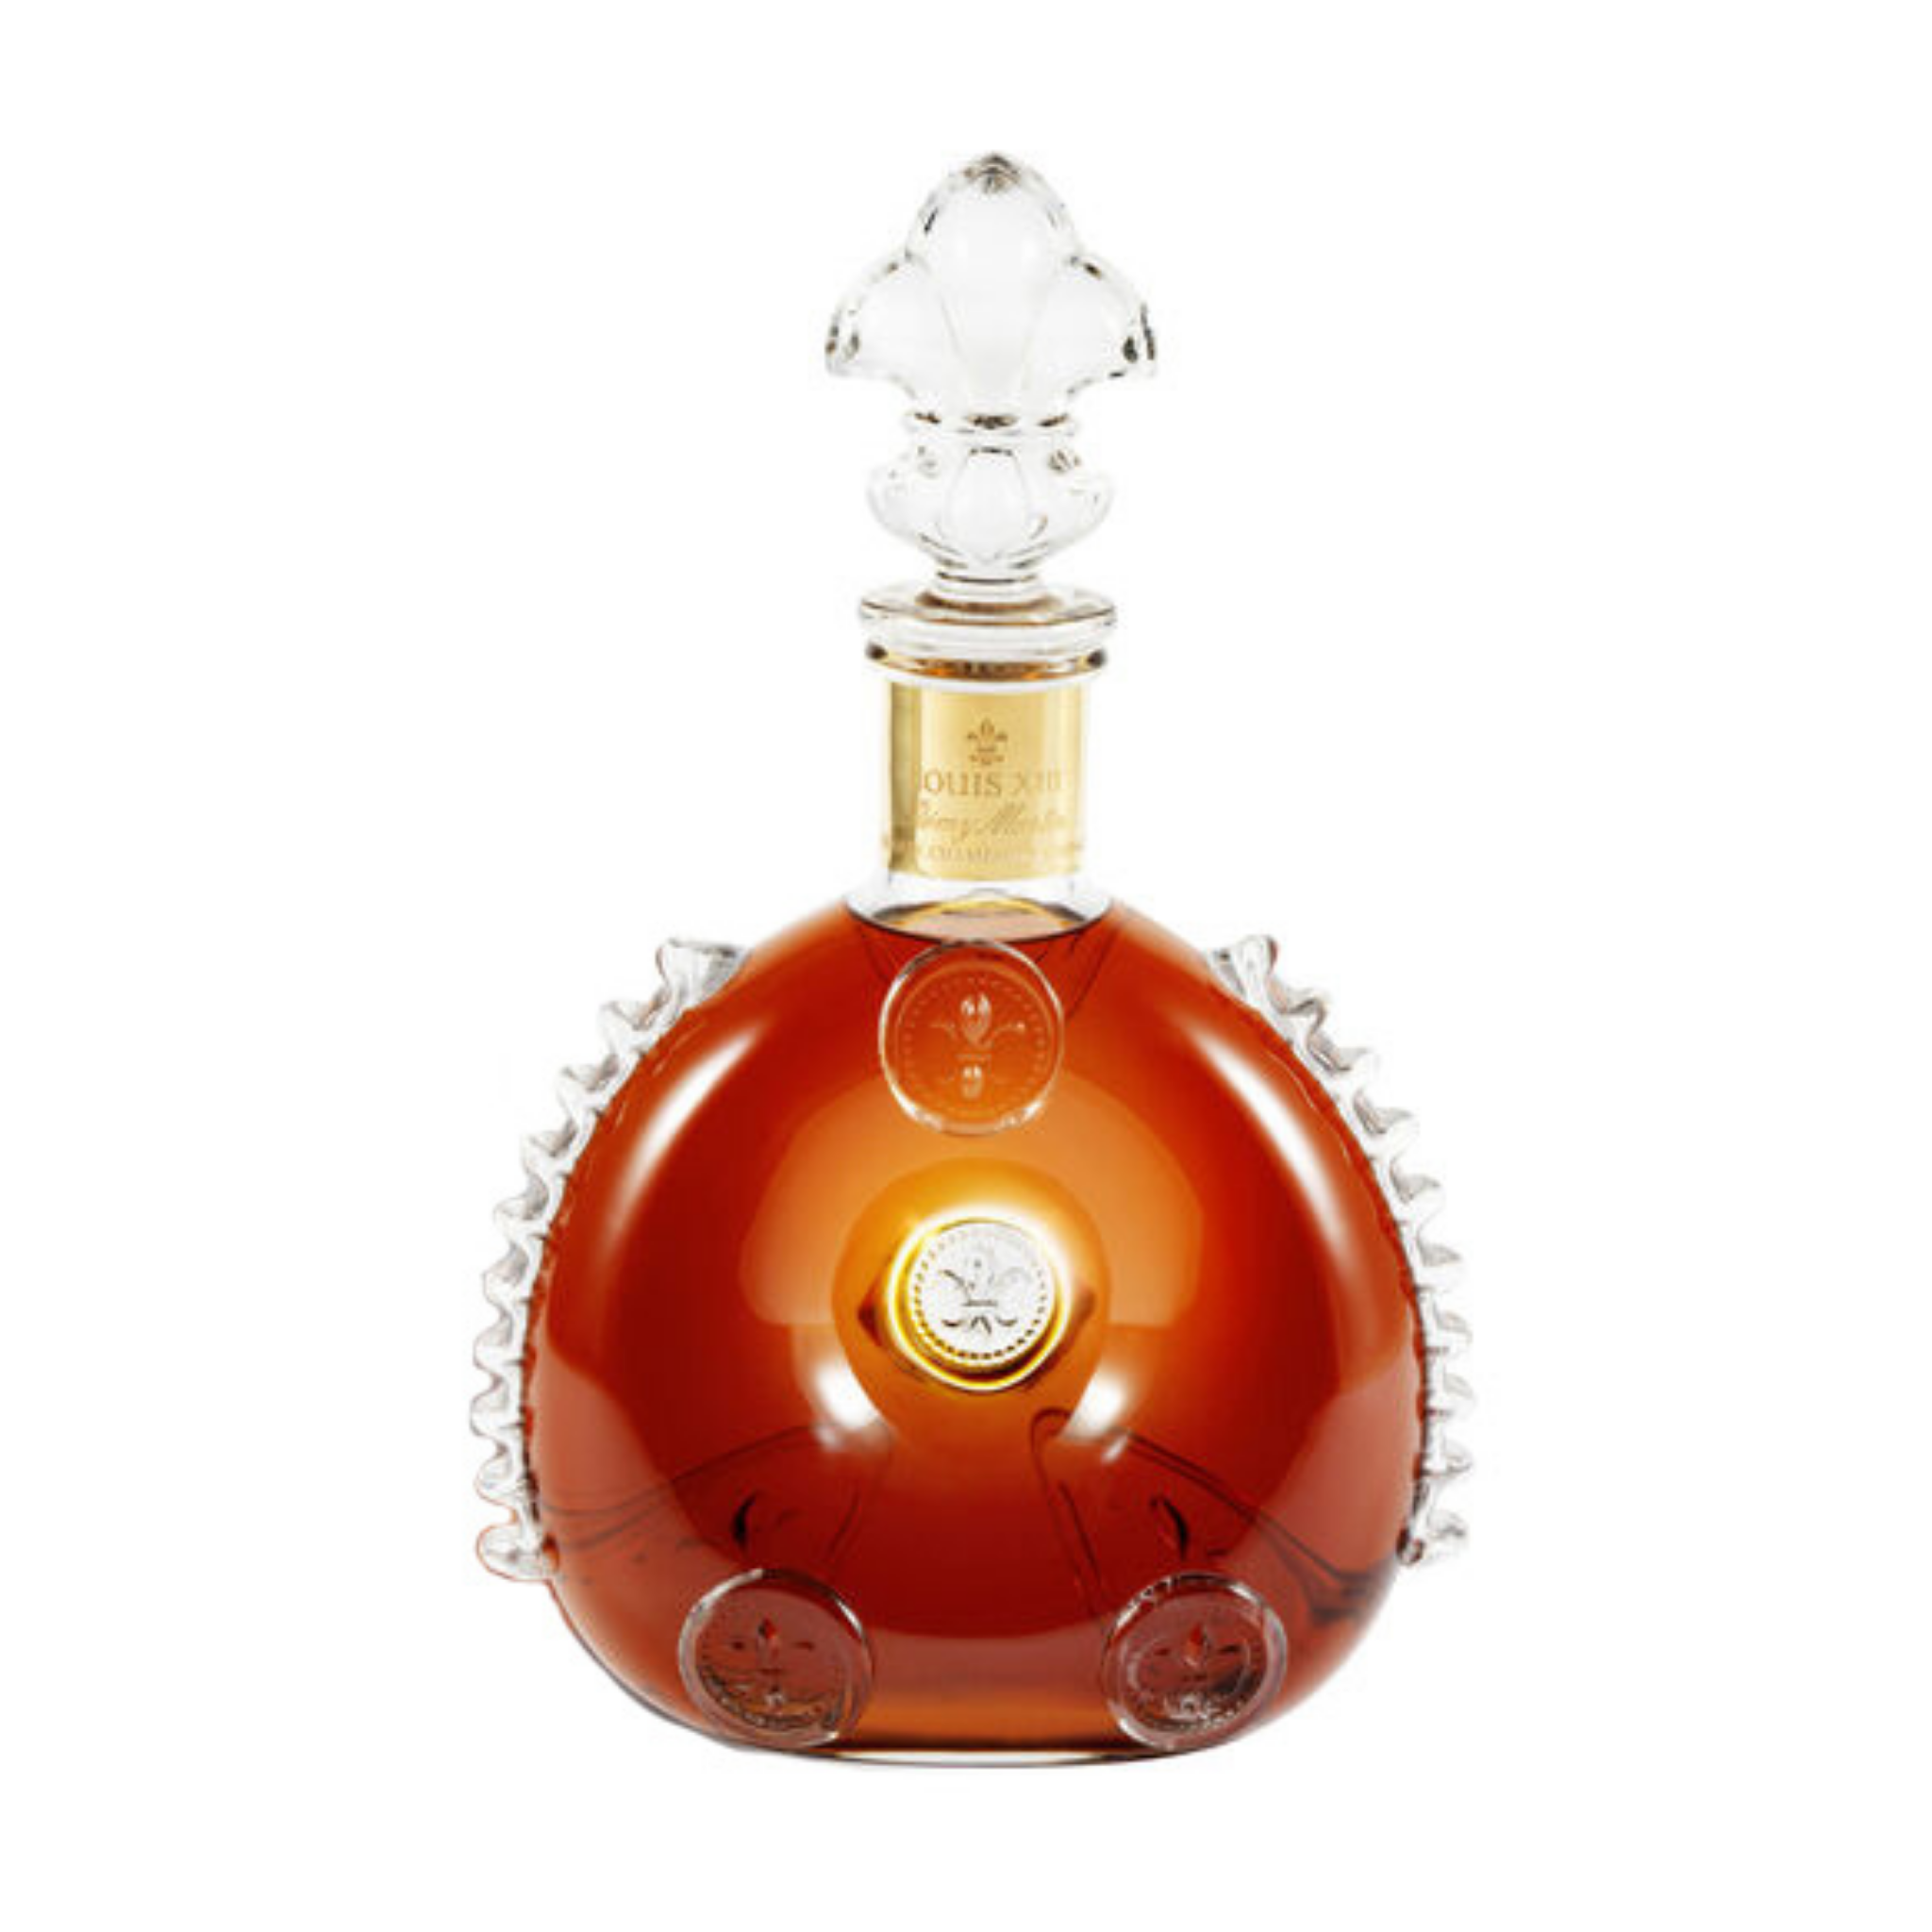 Remy Martin Louis XIII Cognac Gift Pack